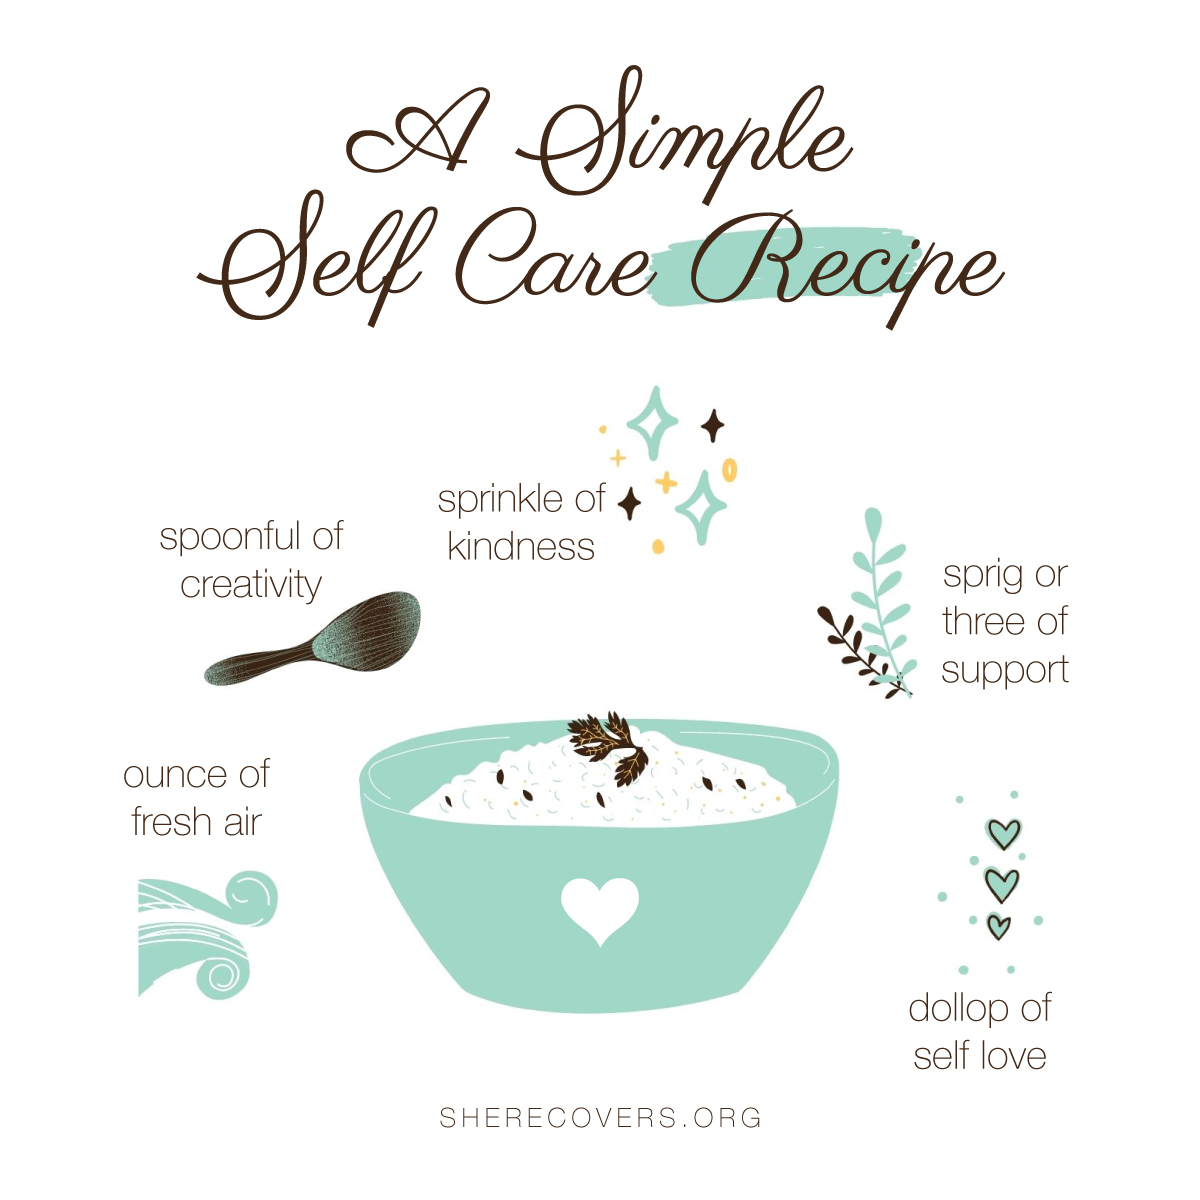 What is your recipe for self-care? 👩‍🍳 Our self-care recipe includes: ✨ Sprinkle of kindness 🍃 Sprig or three of support 💕Dollop of radical self-love 🌬️Ounce of fresh air 🥄Spoonful of creativity #SHERECOVERS #RadicalSelfLove #RecoveryInspo